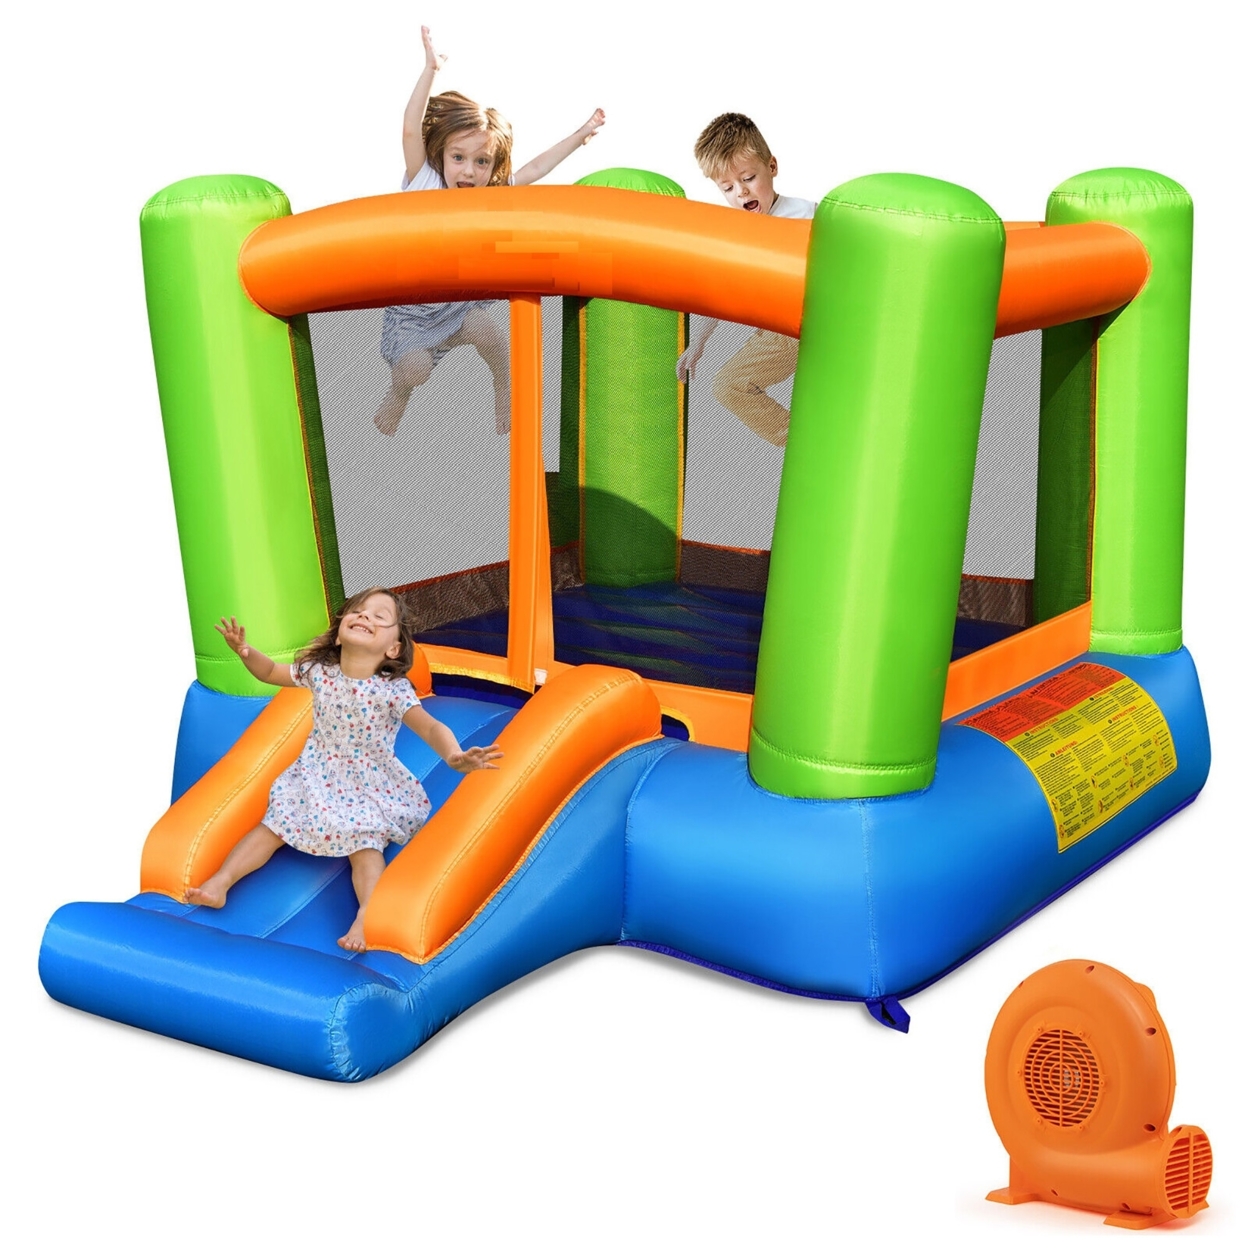 Inflatable Bounce House Kids Jumping Playhouse Indoor & Outdoor With 550W Blower